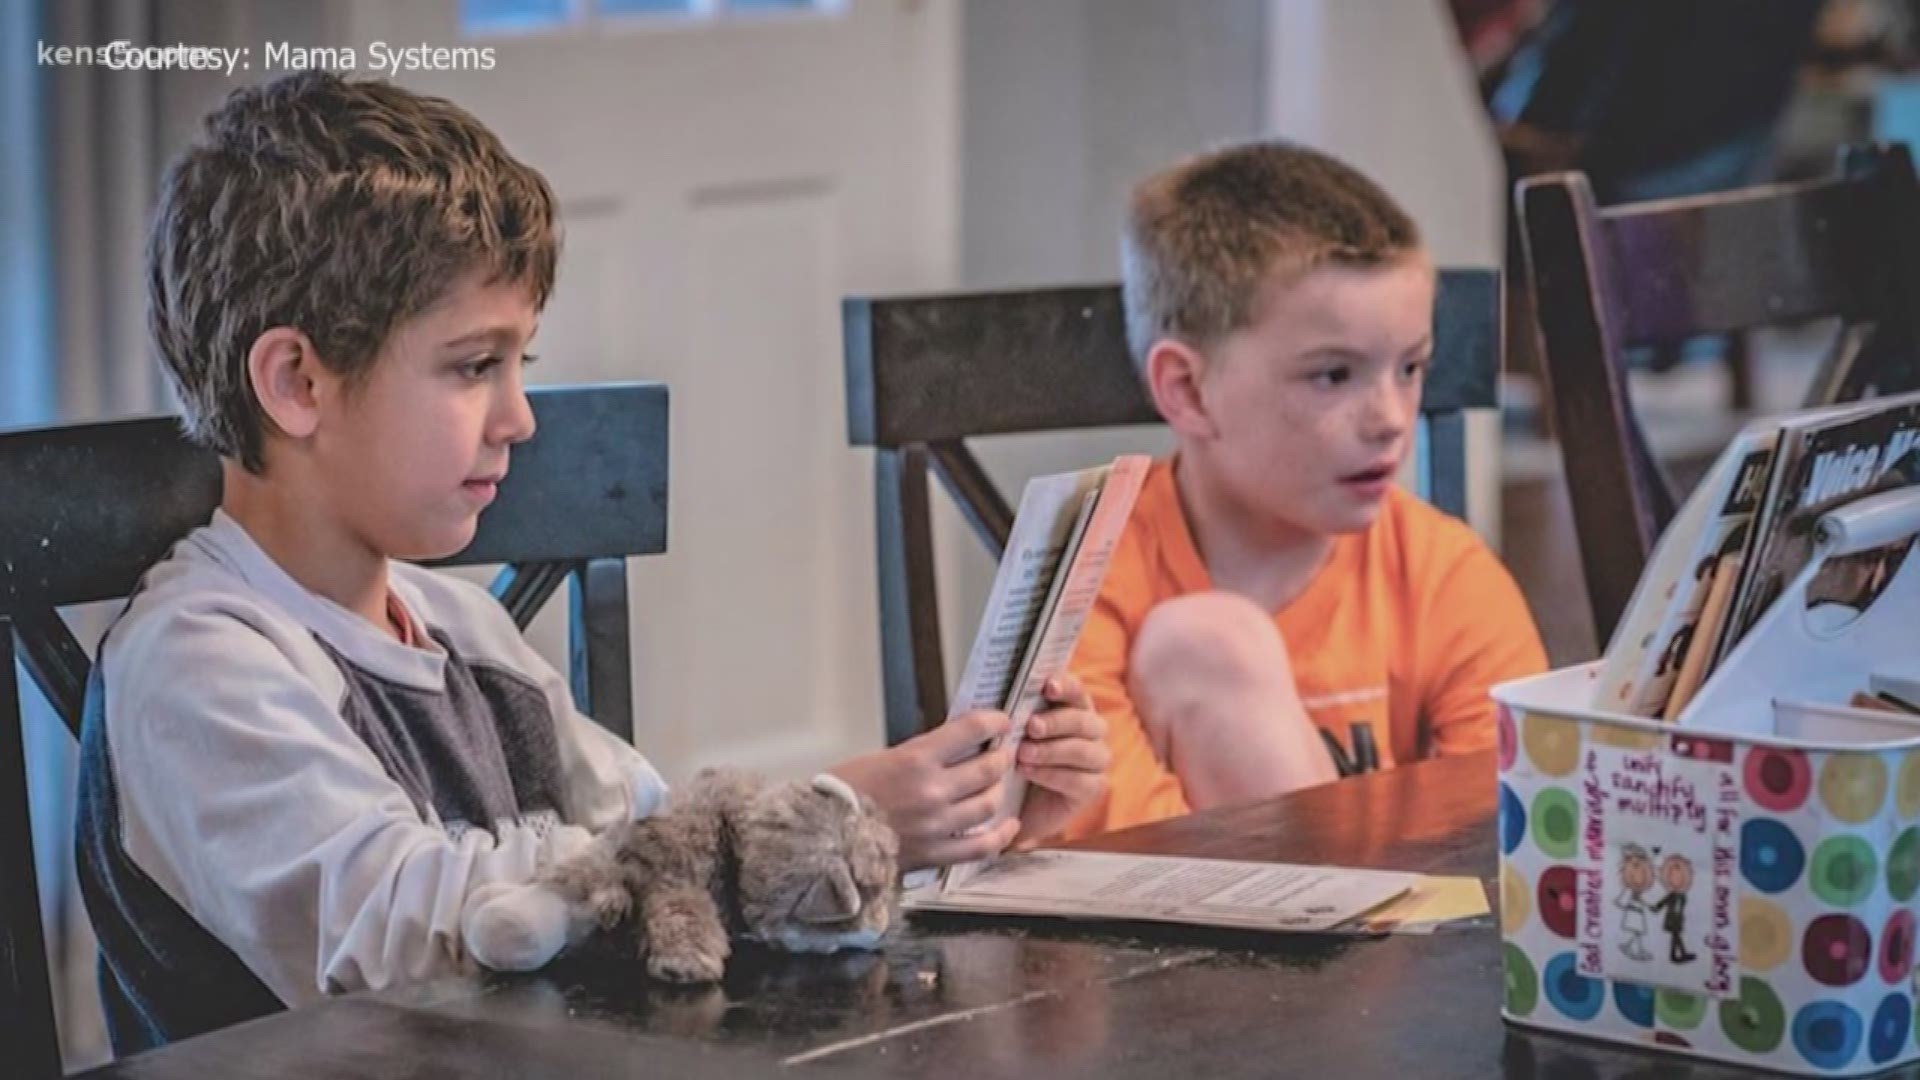 A mom of 10 and the founder of a homeschooling resource website gives advice for parents struggling with their kids' distance learning.